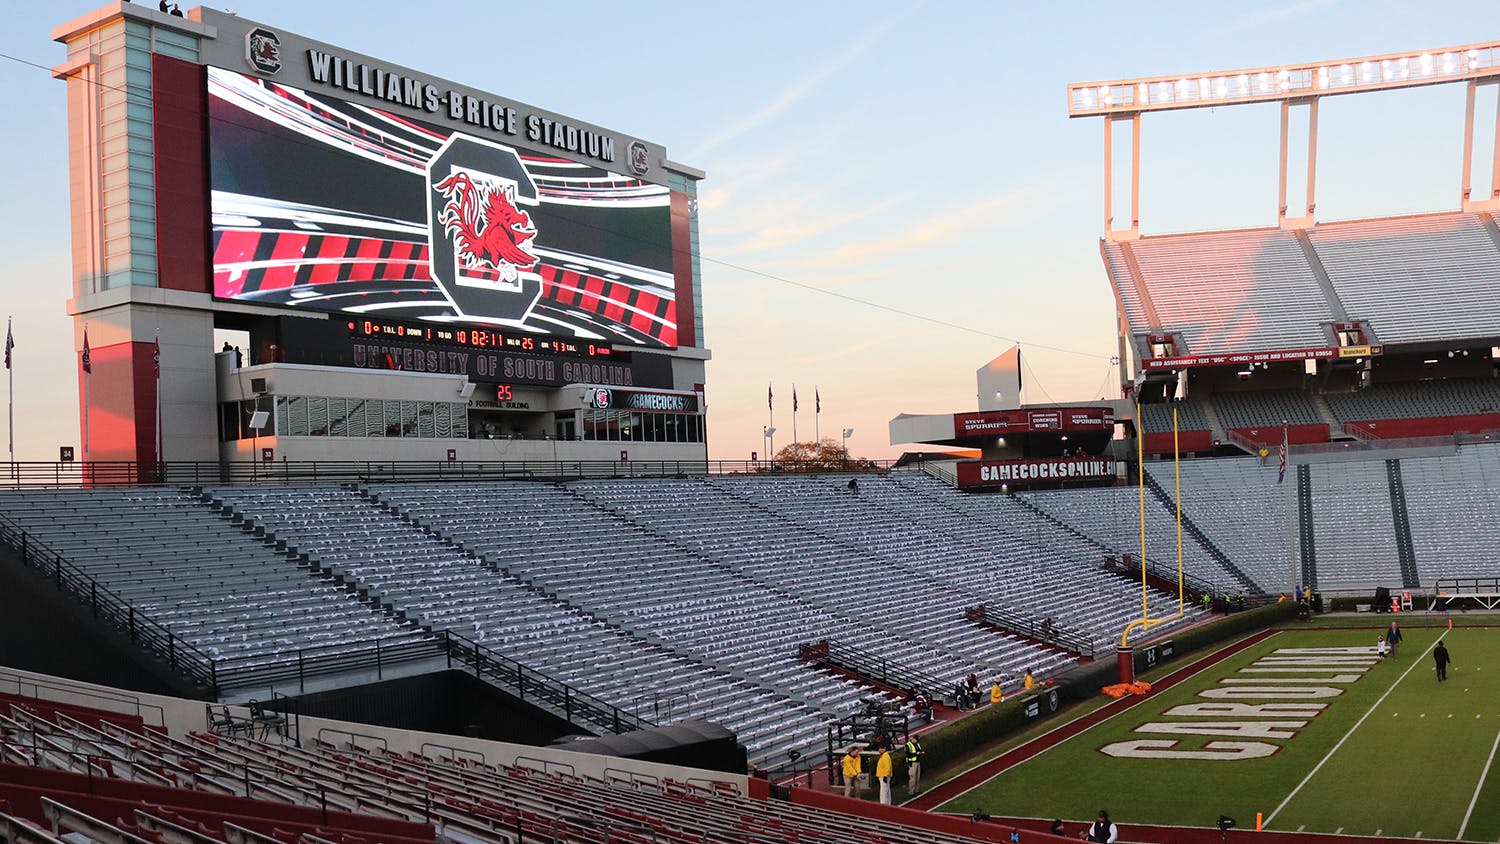 FILE — The inside of an empty Williams-Brice Stadium at the University of South Carolina in Columbia, South Carolina. 